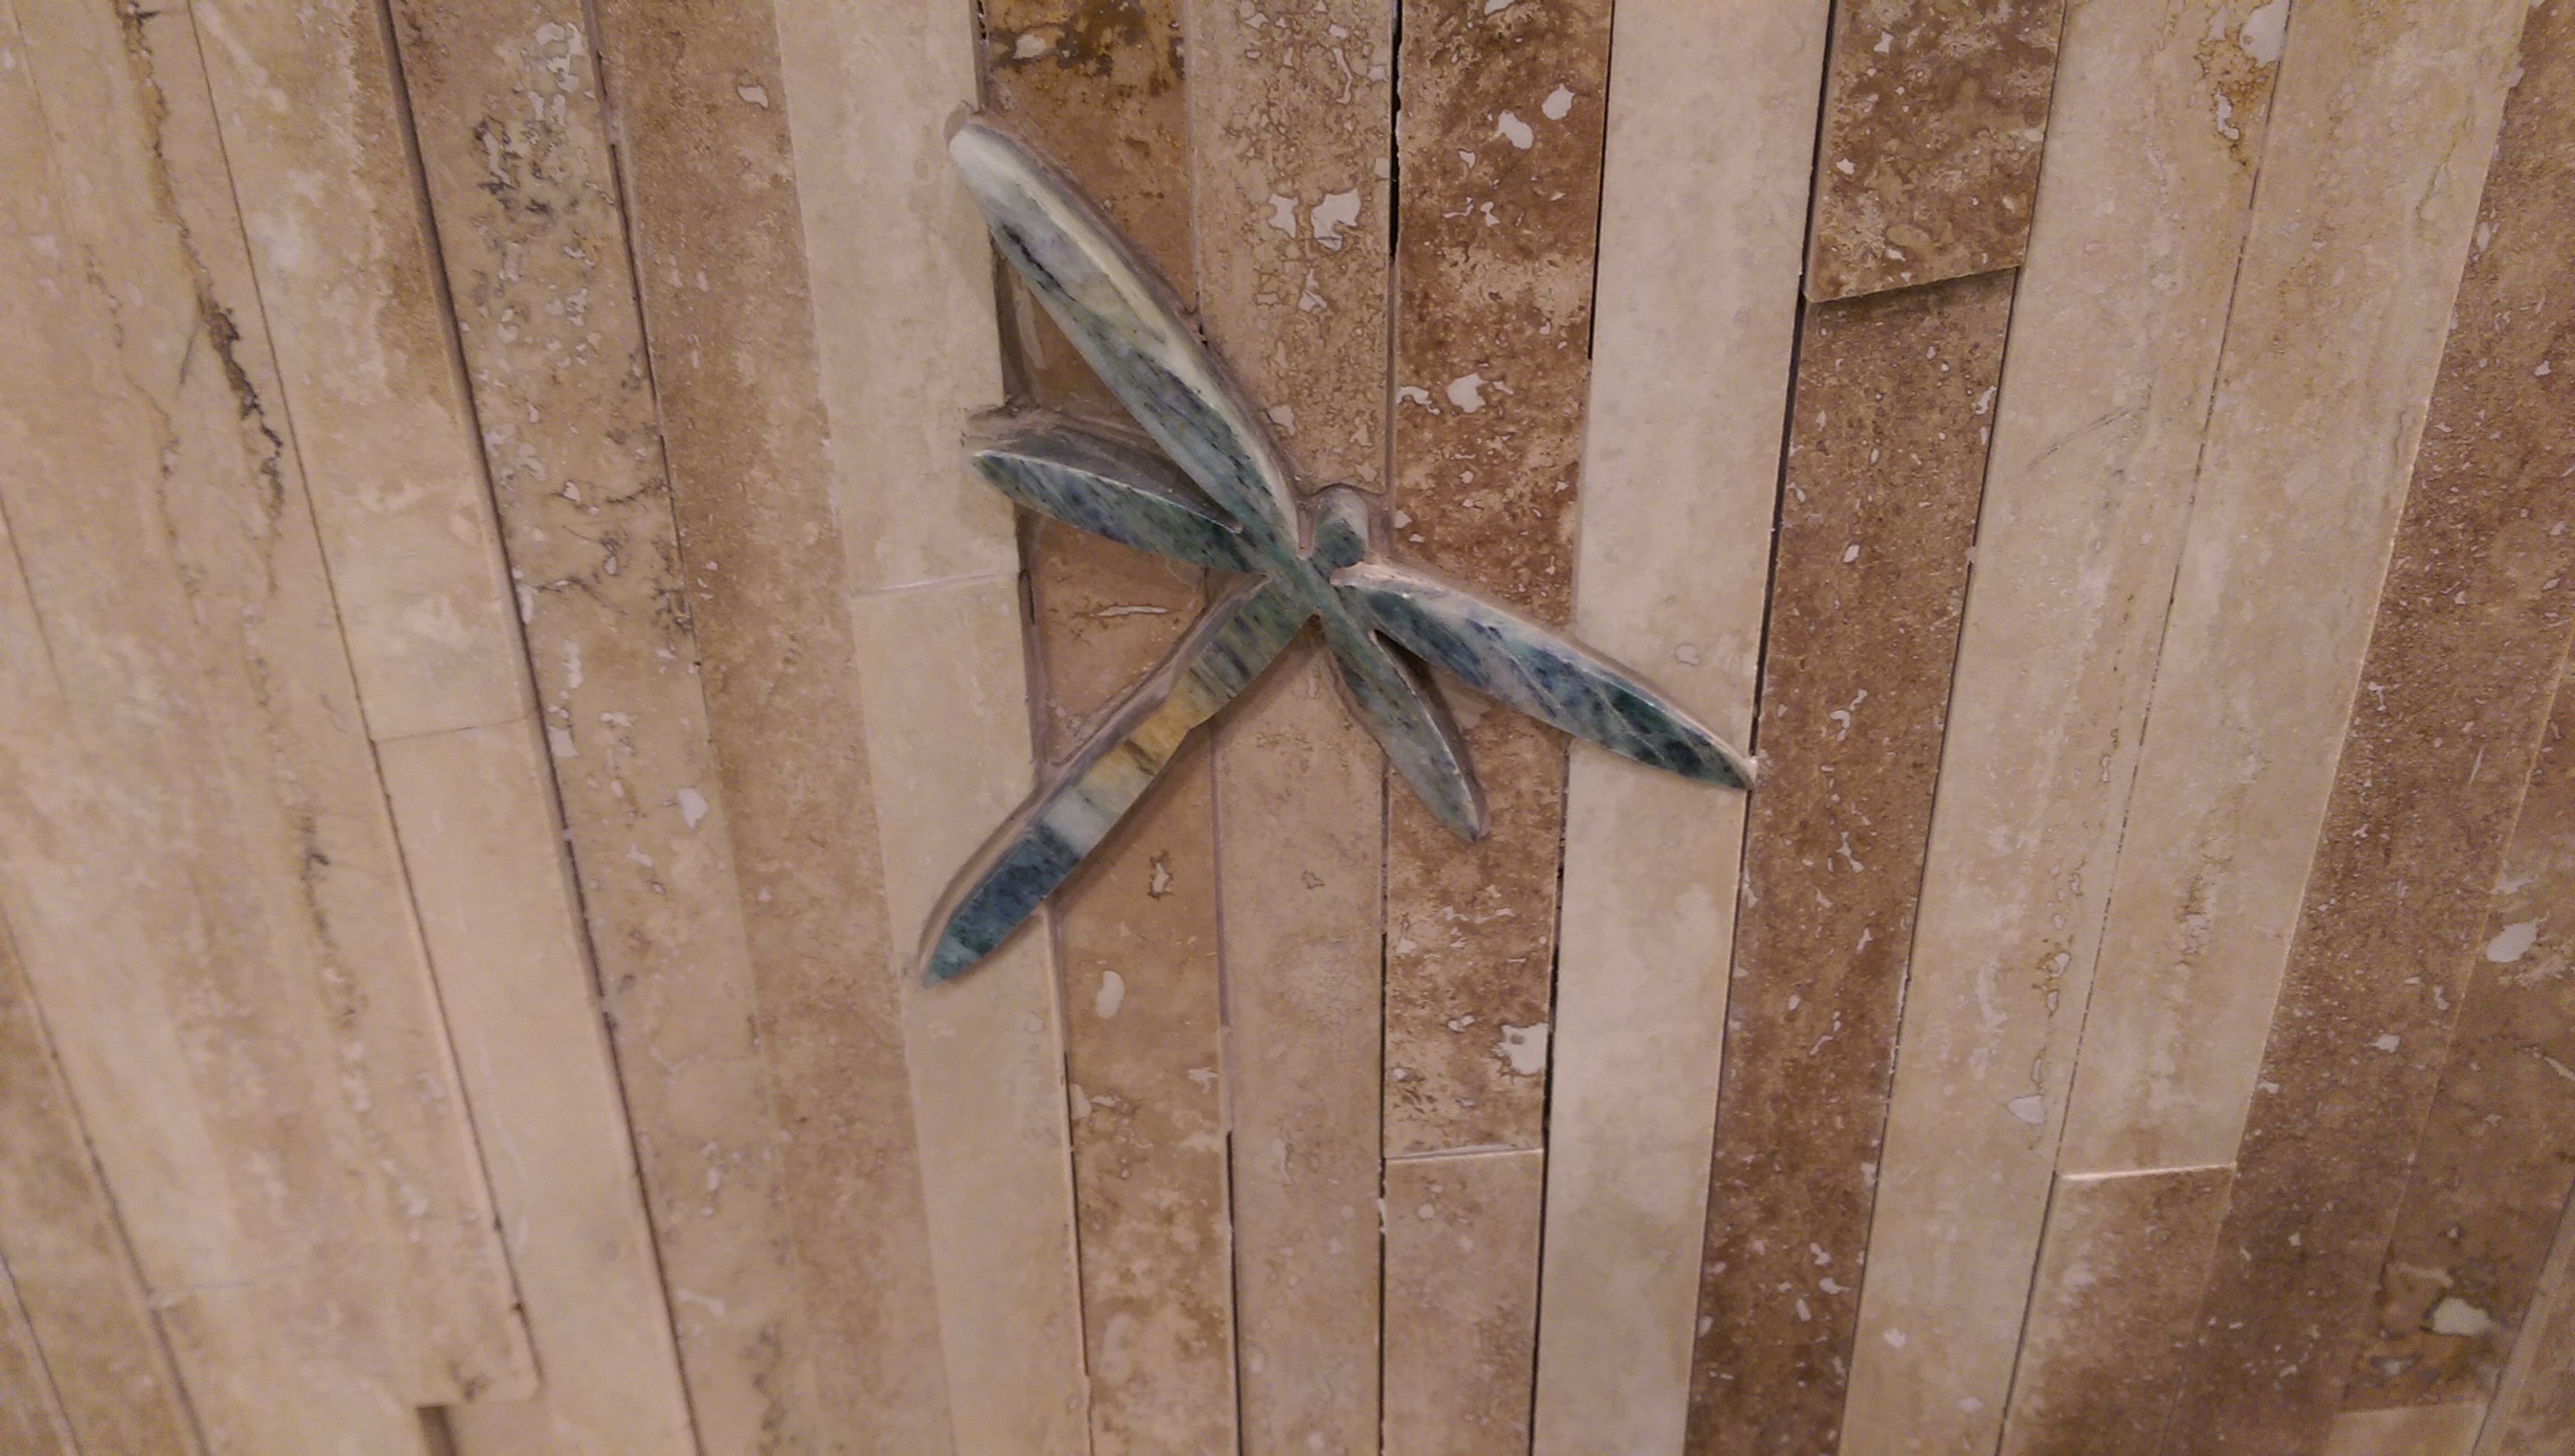 metal dragonflies made by water jetting